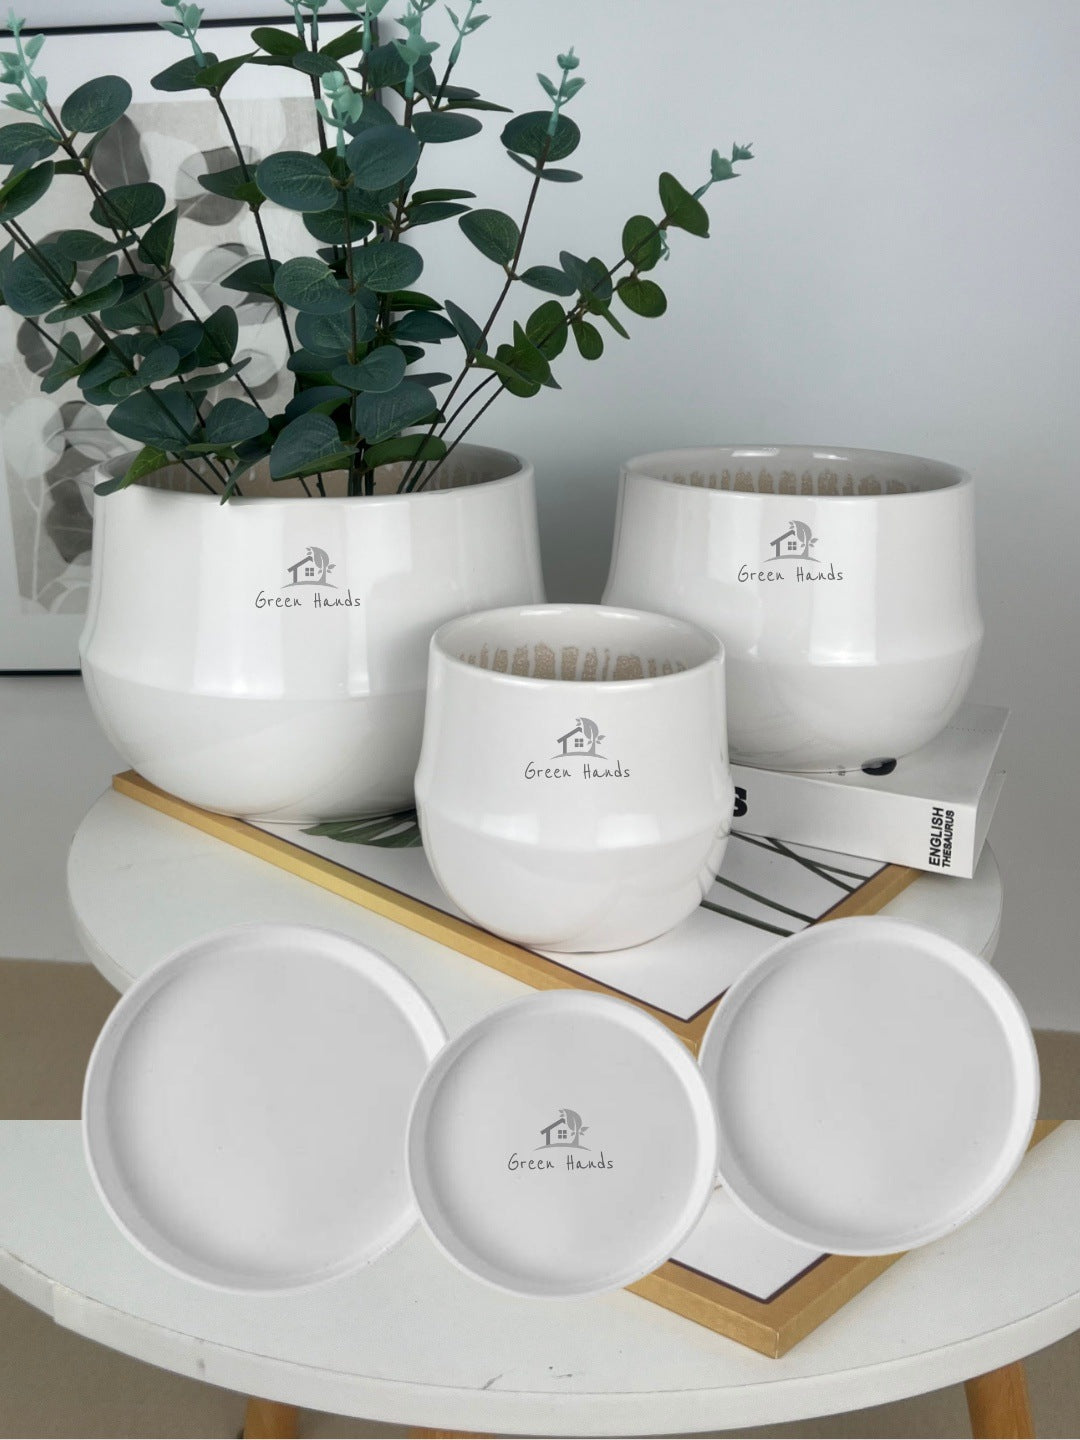 Luxury White Glossy Ceramic Pots in UAE: Modern, Chic Décor for Desktop Plants | Available in Dubai & Abu Dhabi with base plates